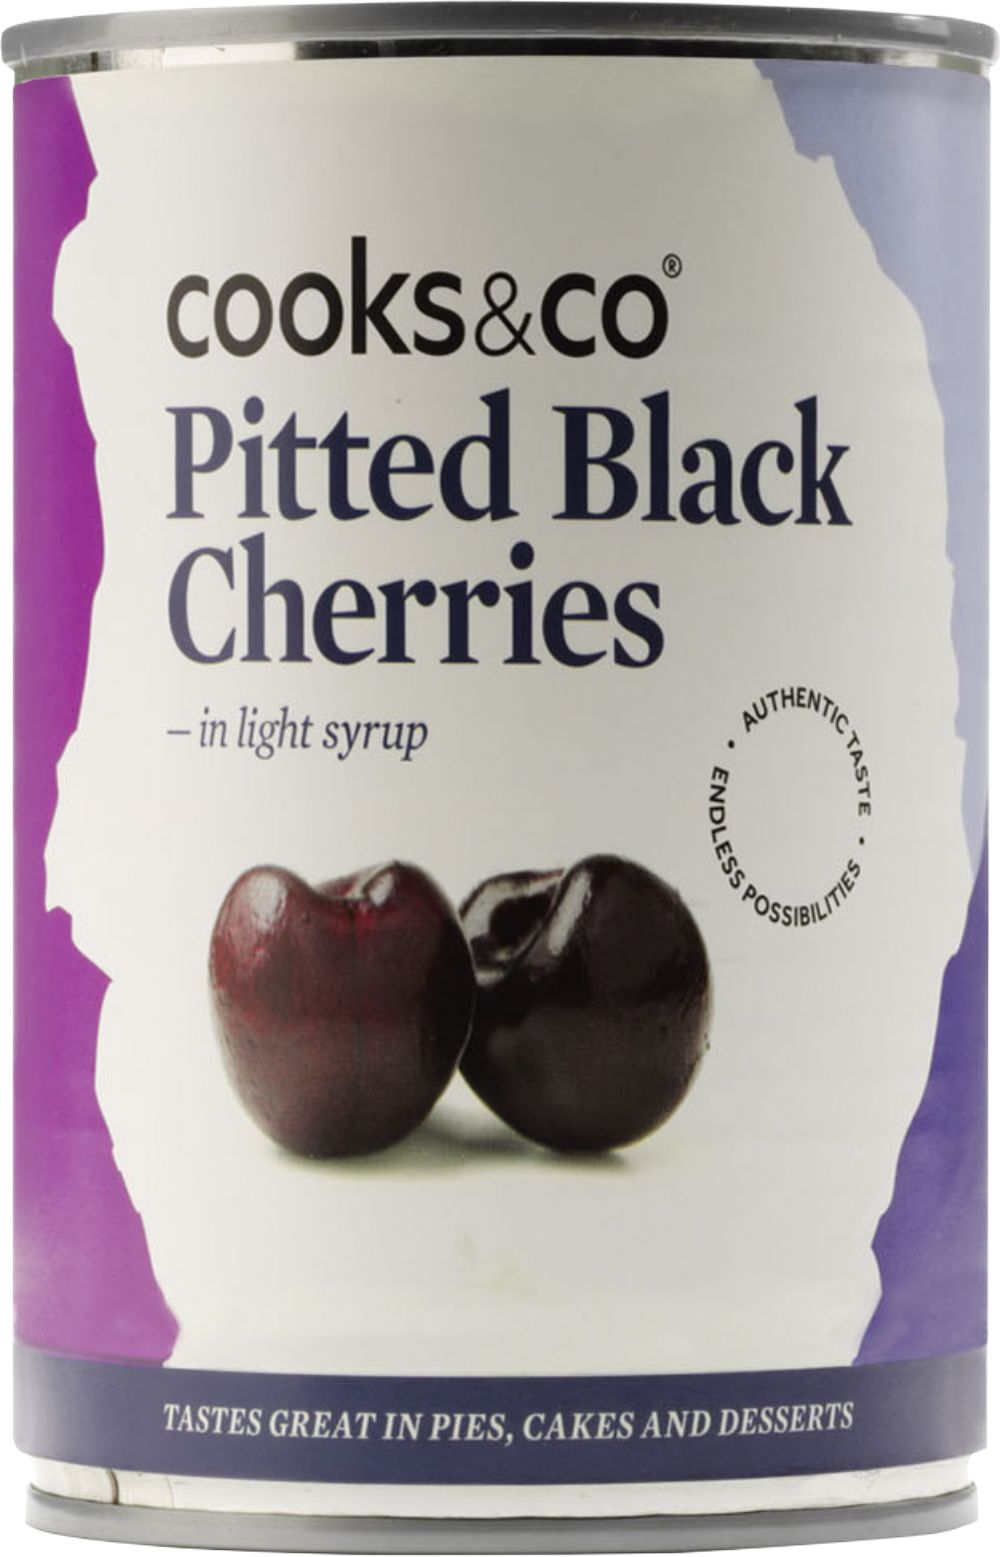 Cooks & Co Pitted Black Cherries